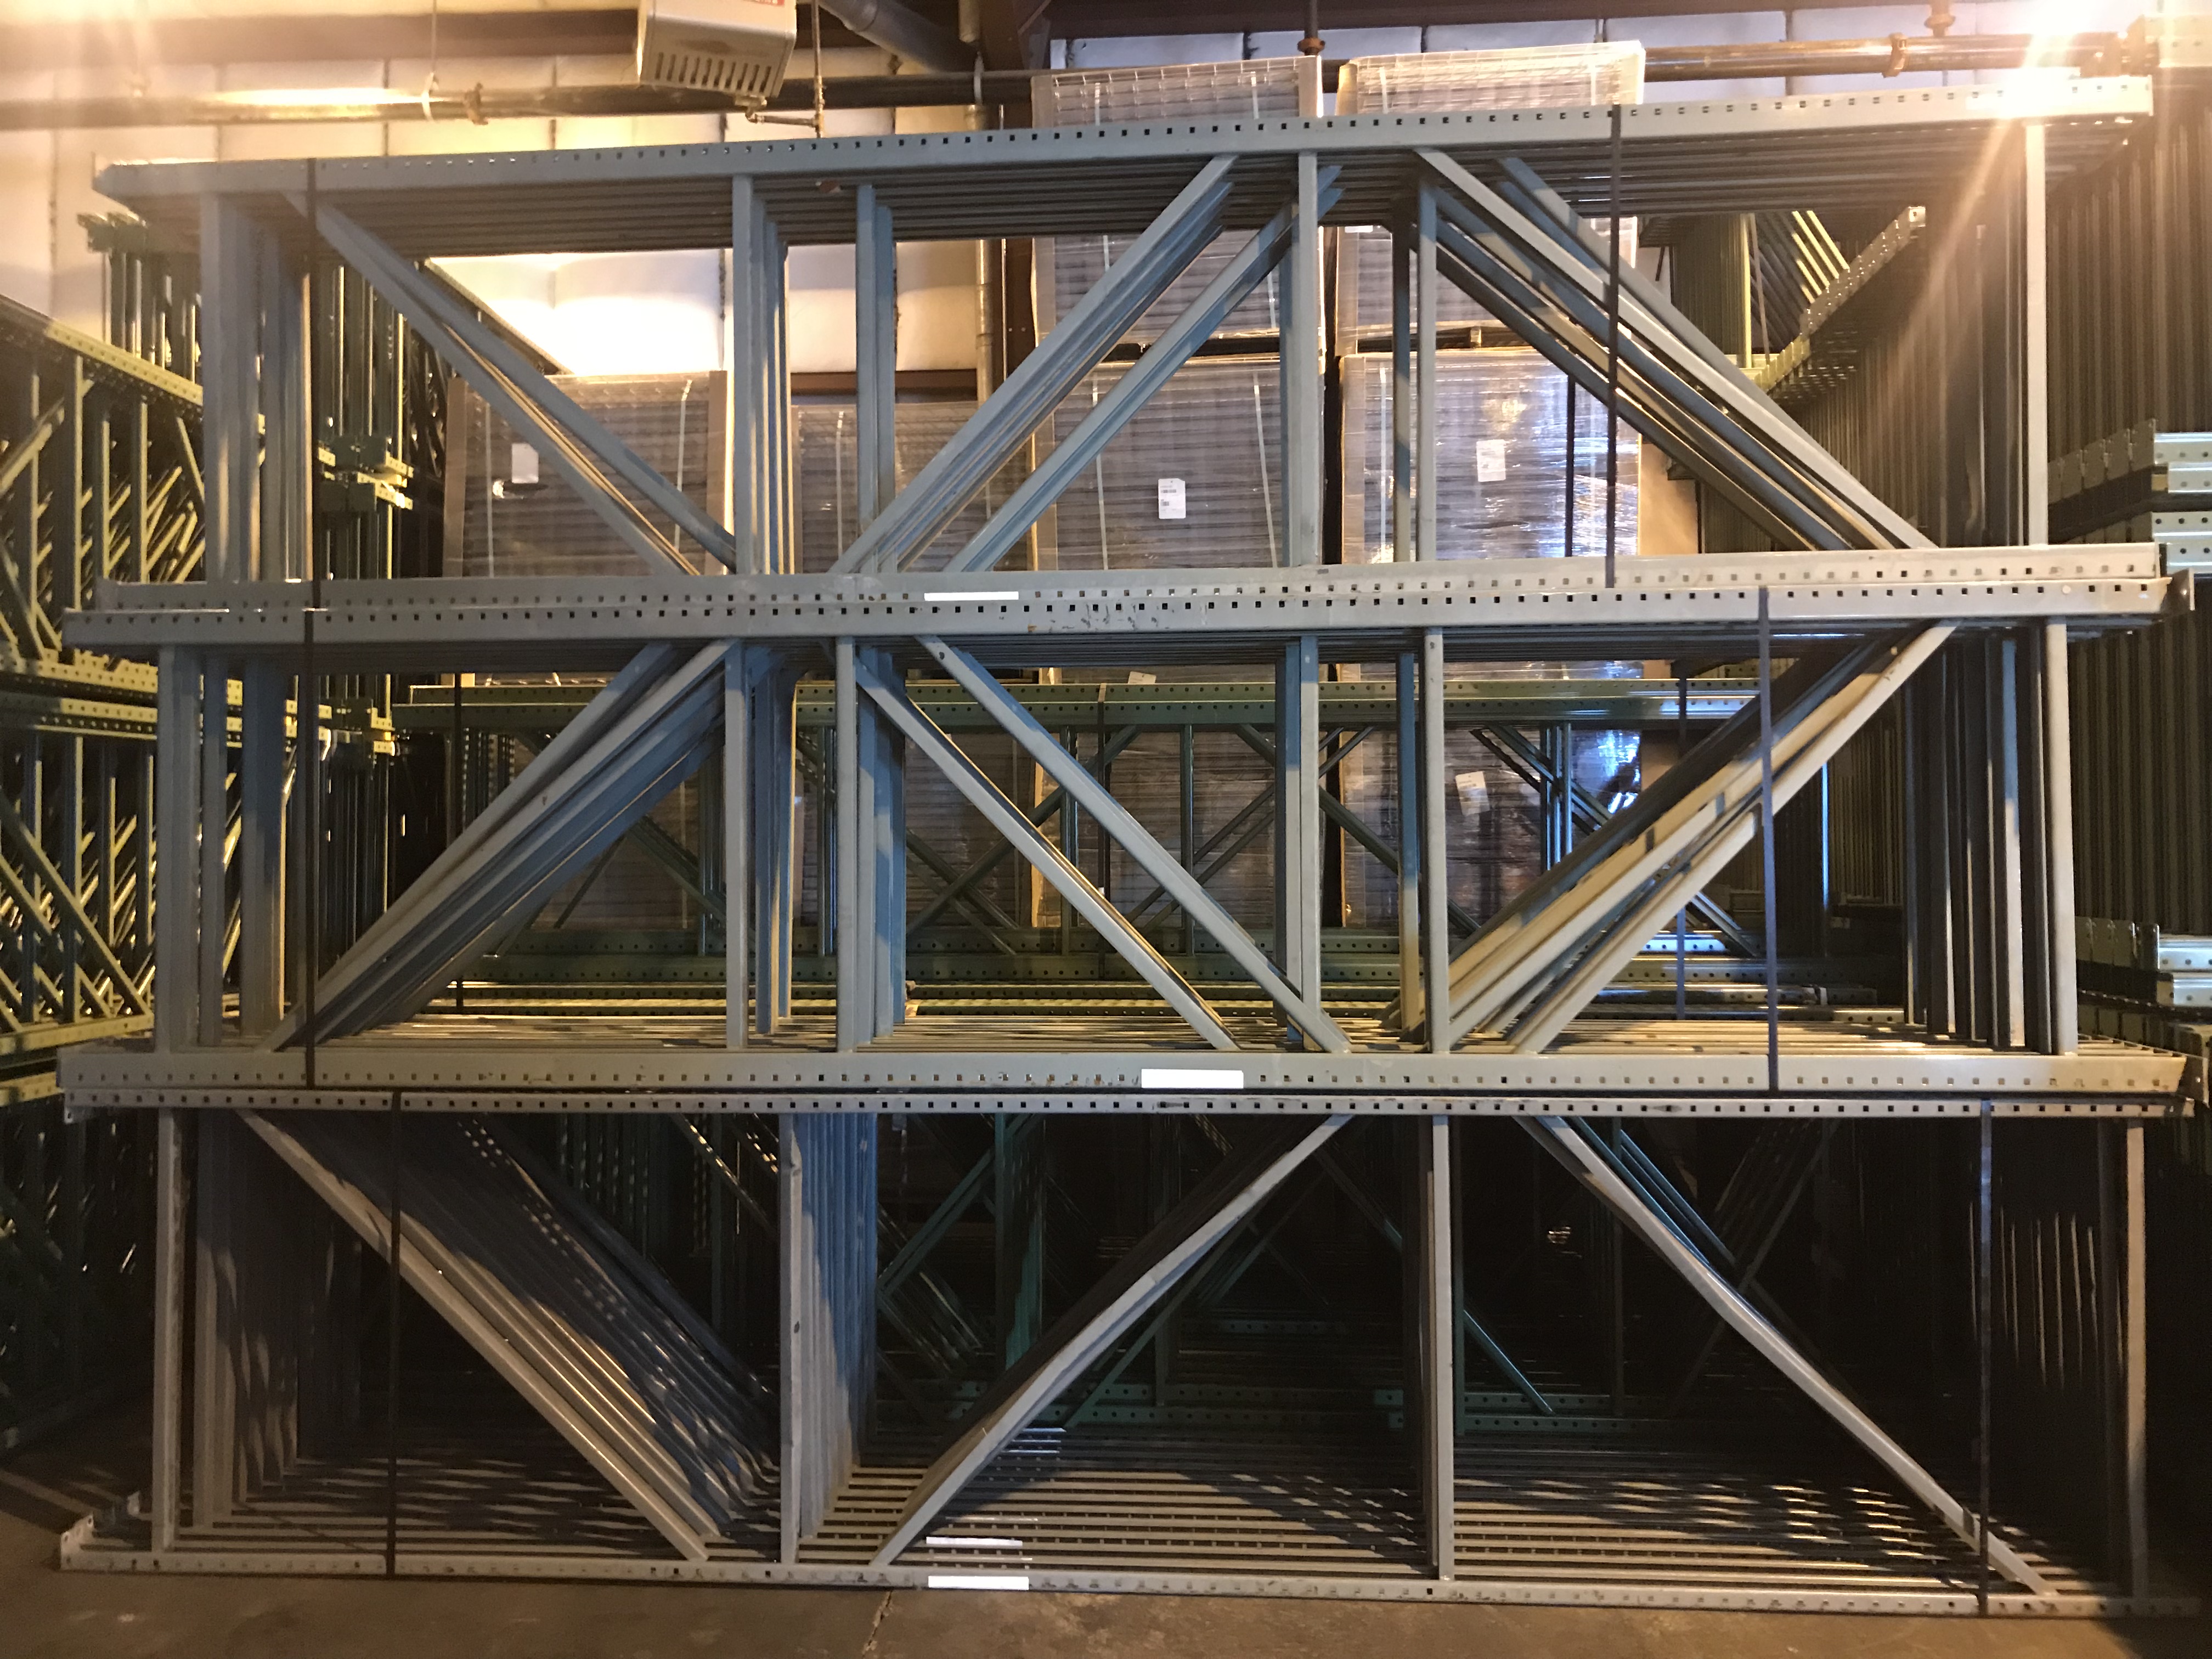 Gray pallet racking dismateled side structures leaned against each other.